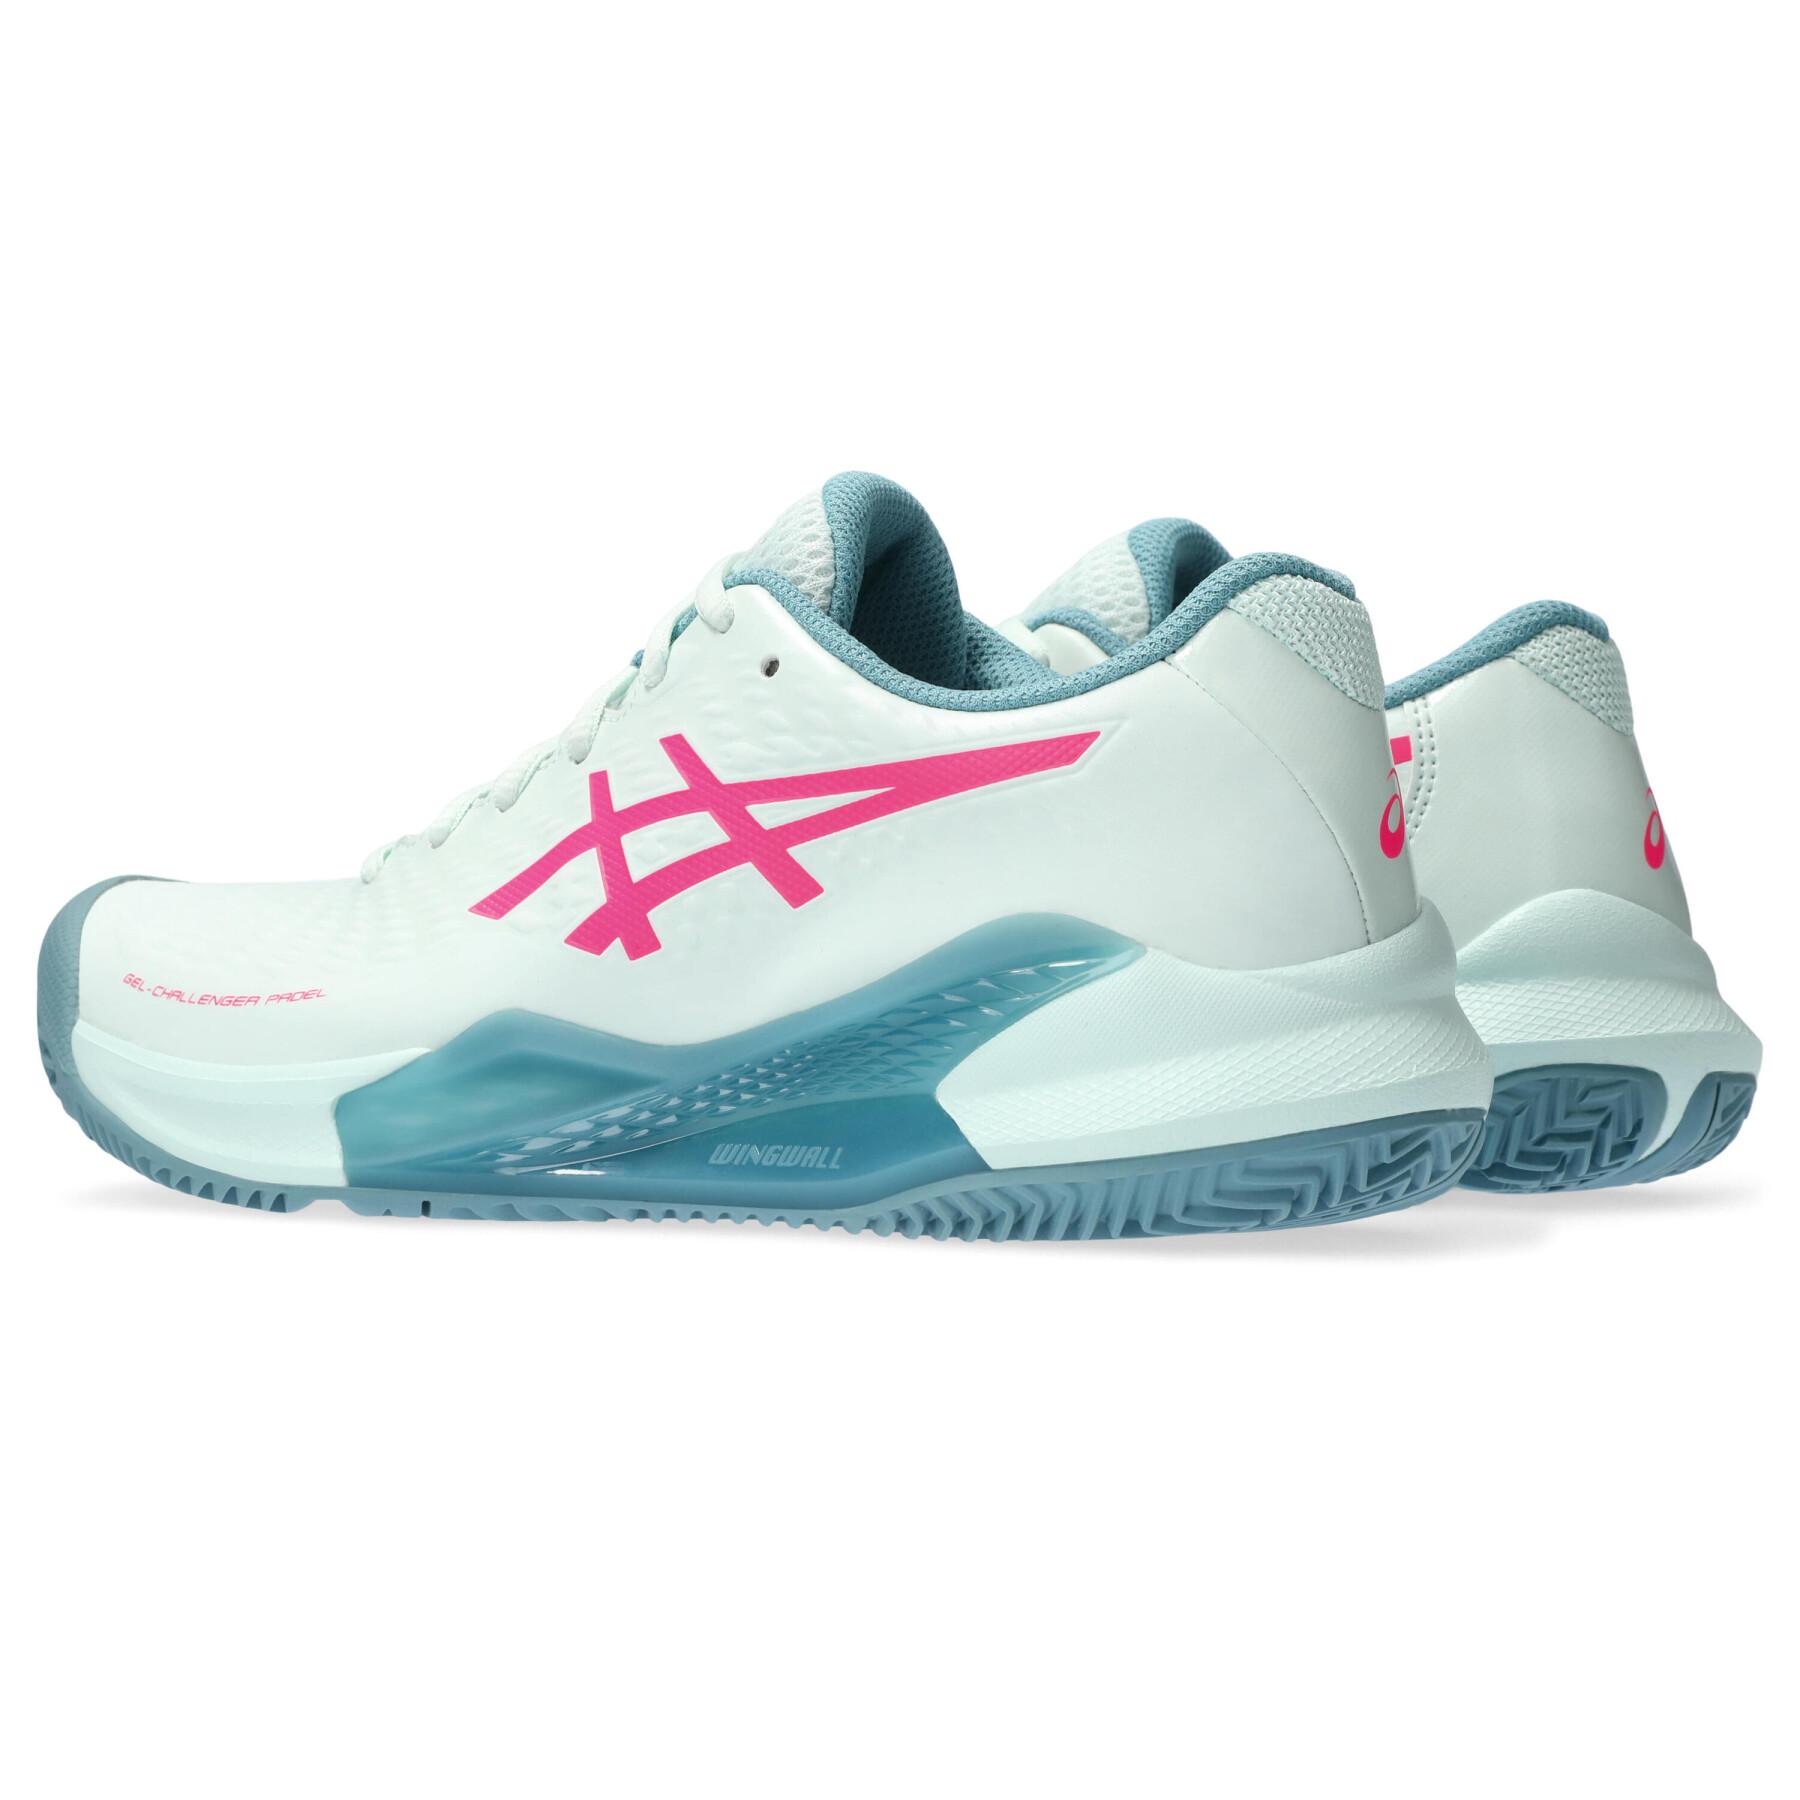 Women's paddle shoes Asics Gel-Challenger 14